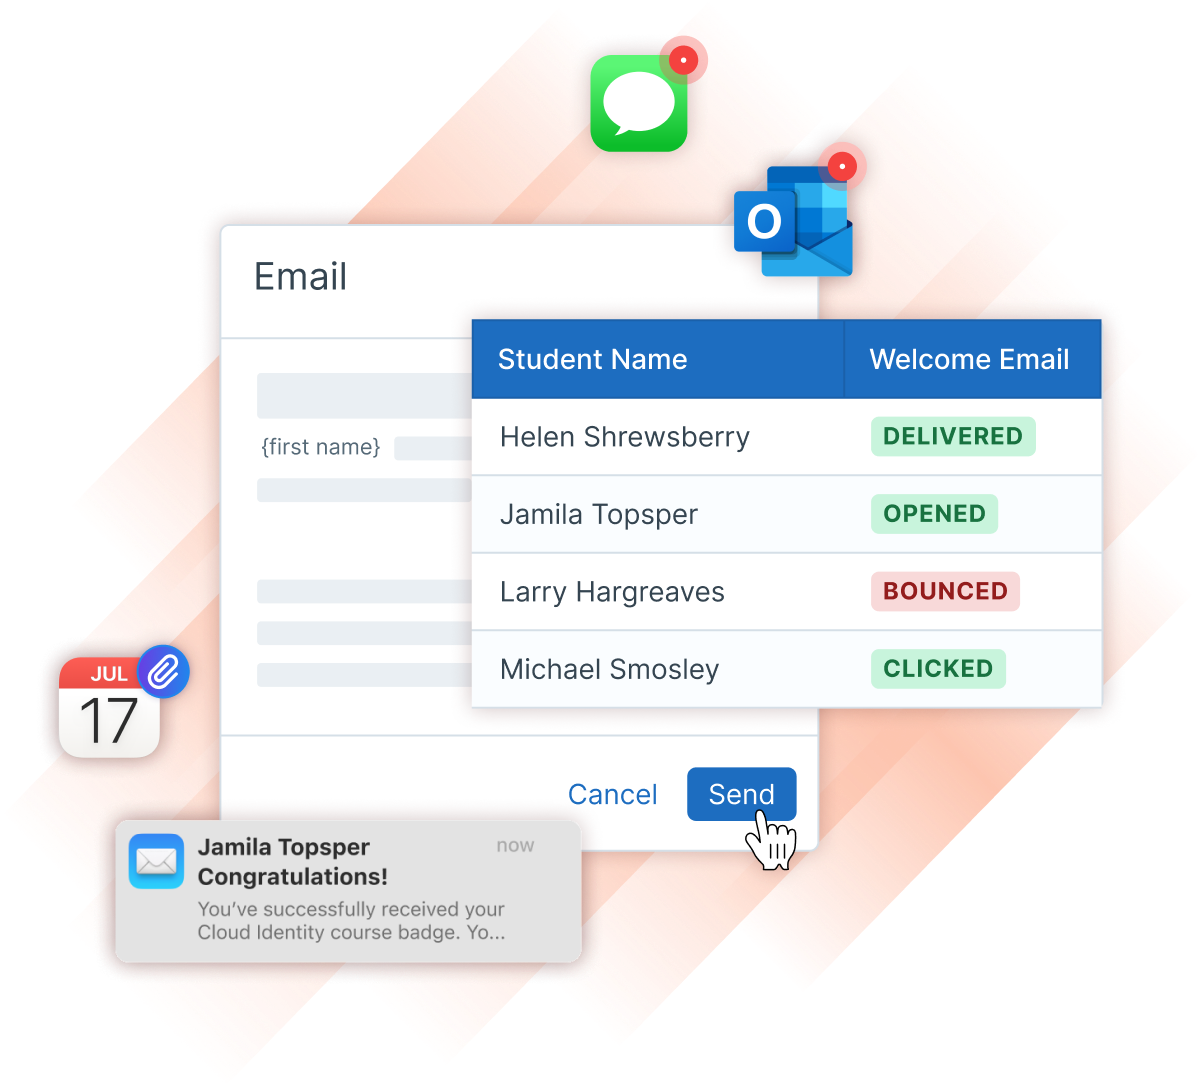 Abstracted email editor in Administrate illustrating forms of communication that can be sent and follow-on actions from recipients.